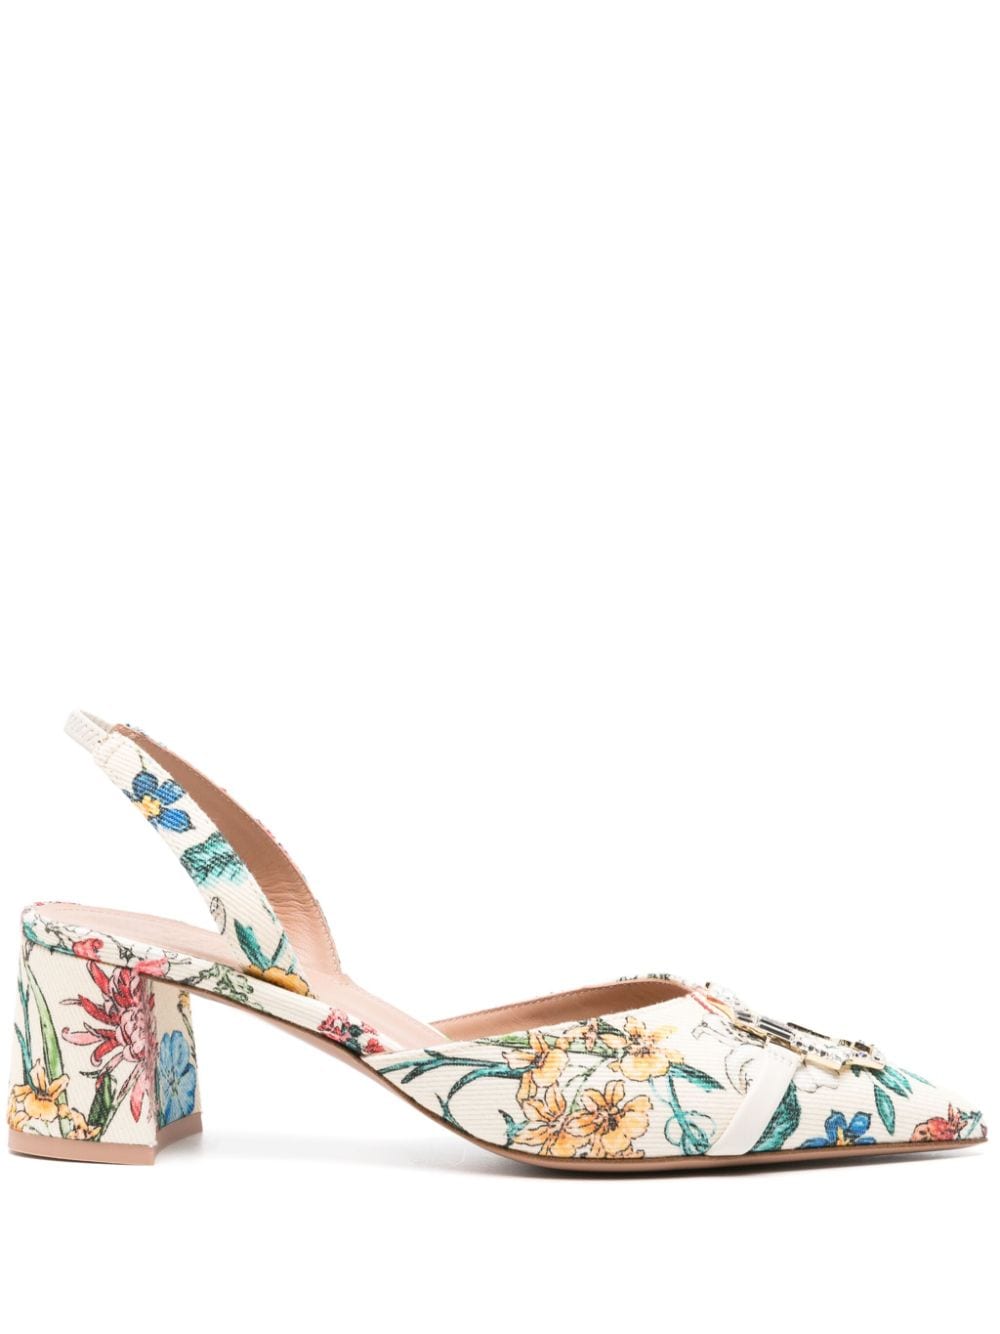 Malone Souliers Floral Cream 60mm slingback mules - Neutrals von Malone Souliers